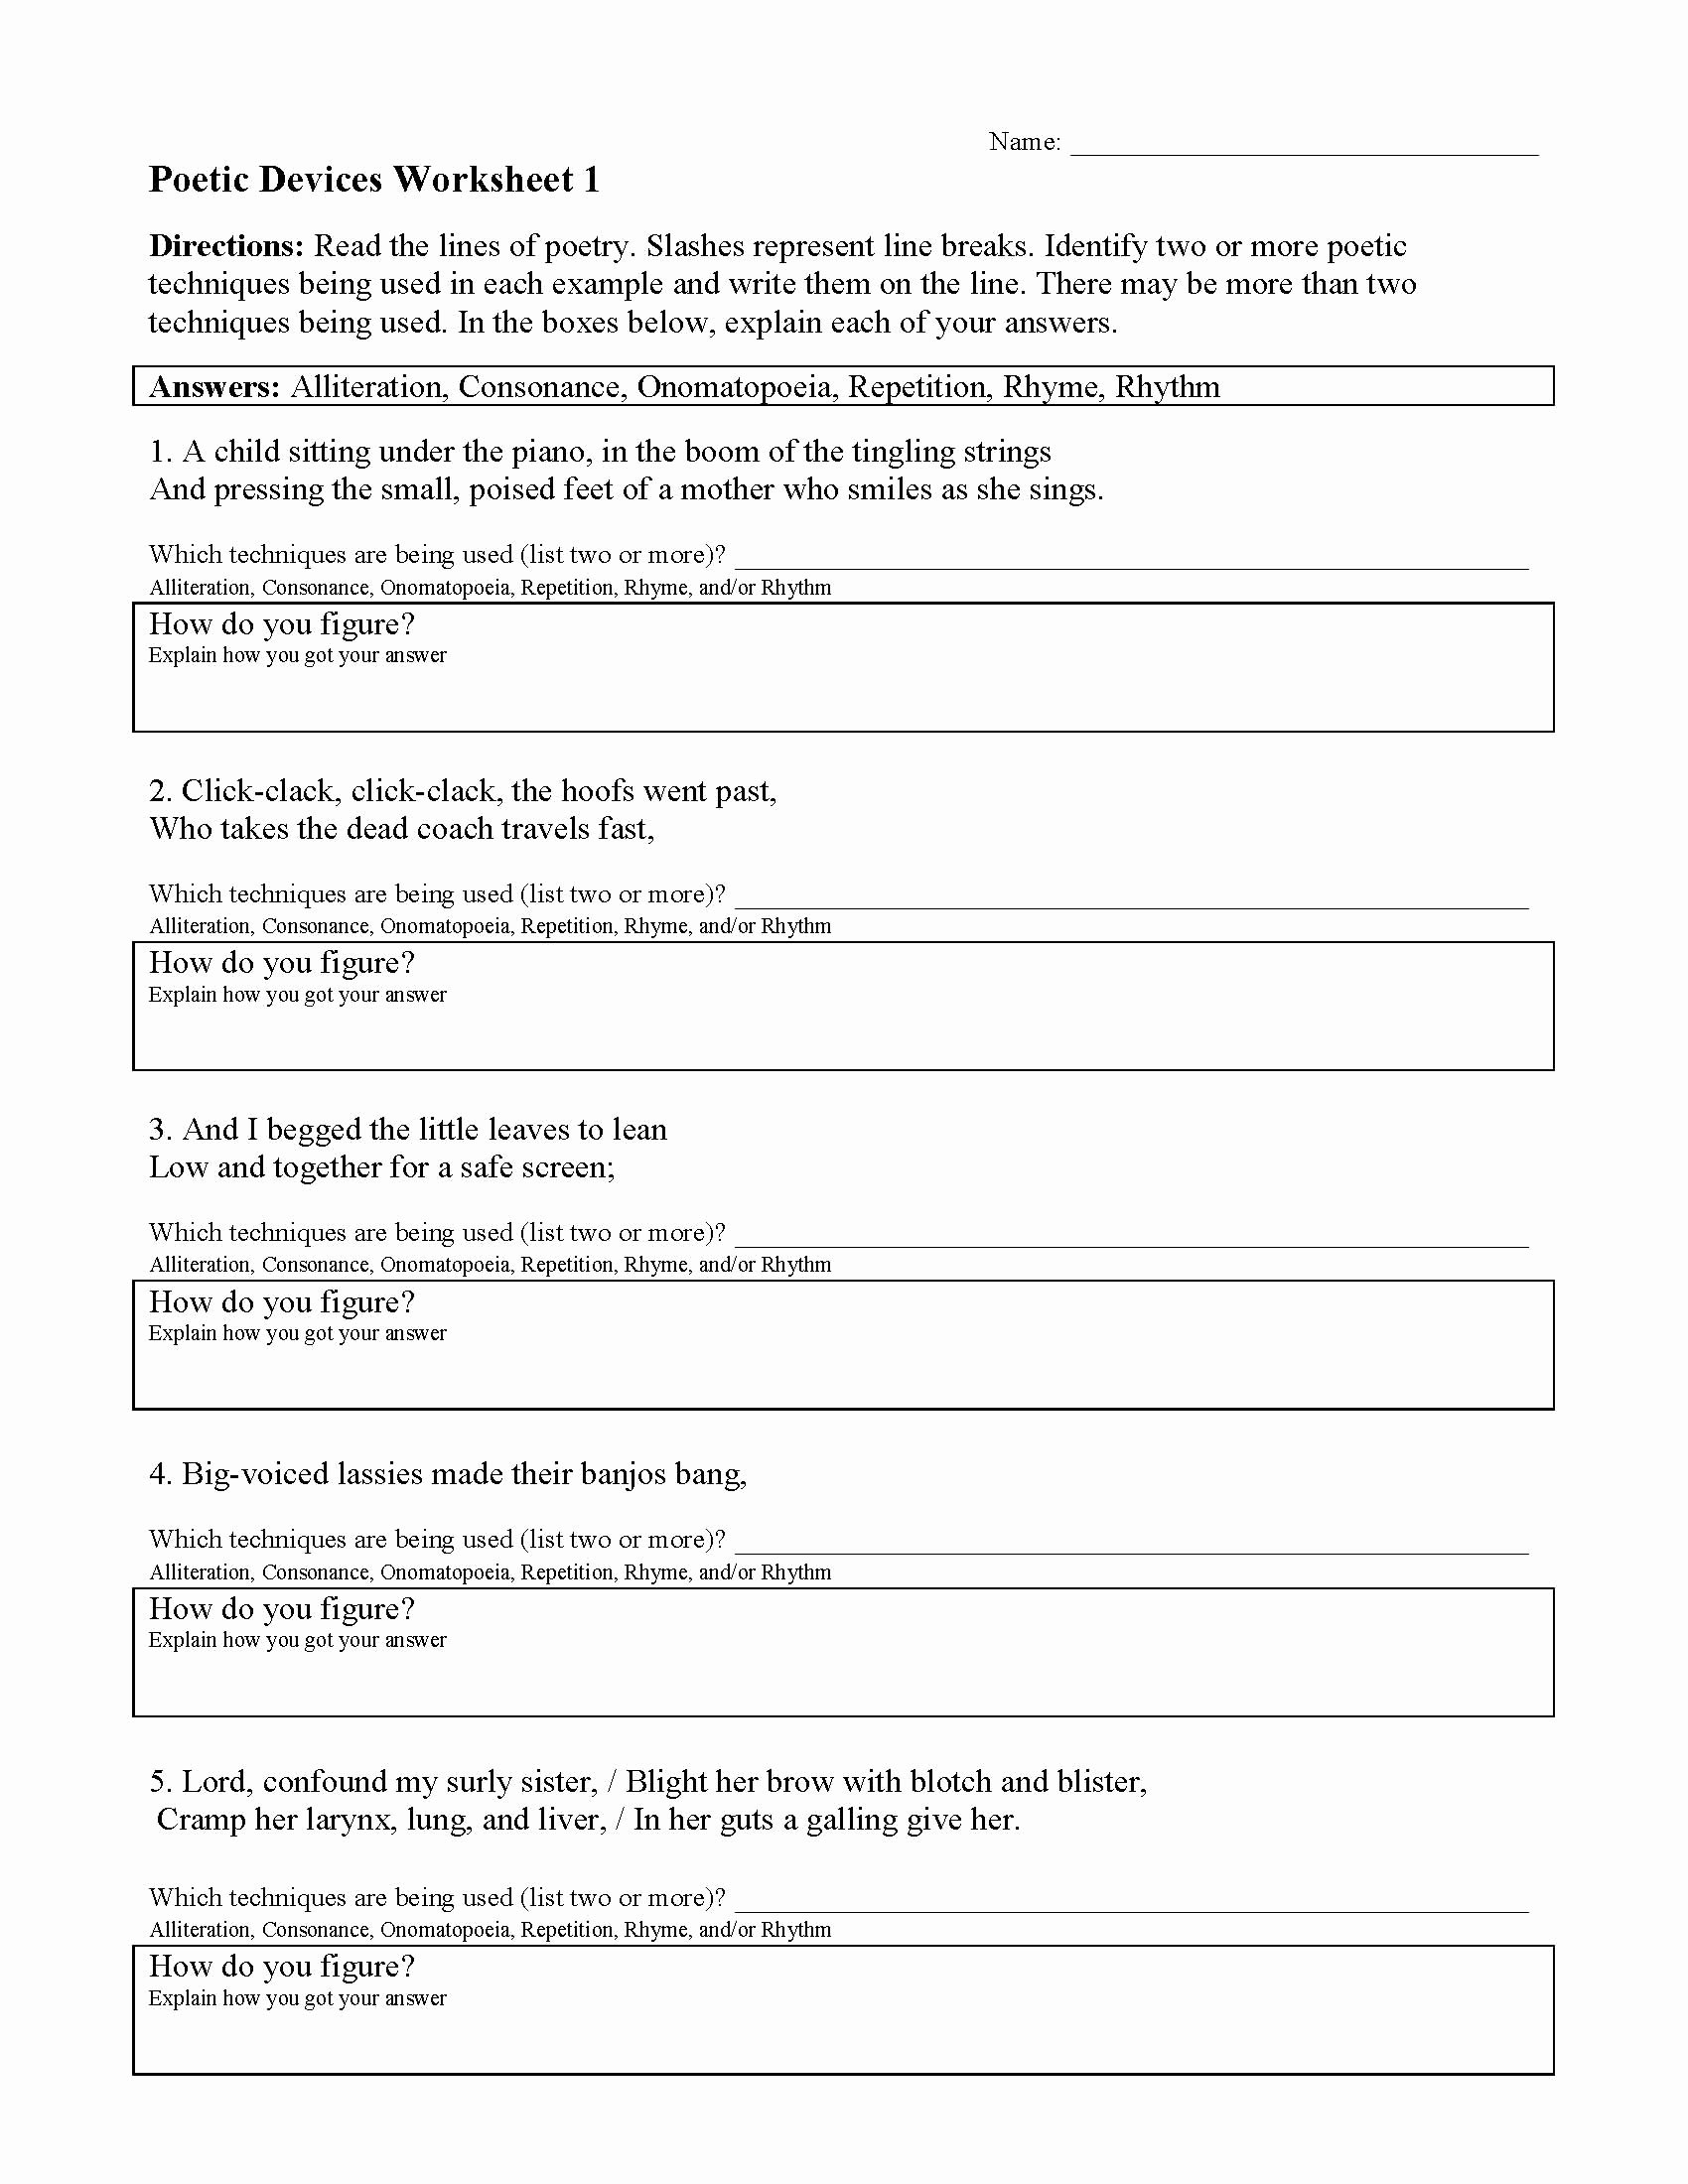 Literary Devices Worksheet Pdf Inspirational Poetic Devices Worksheet 1